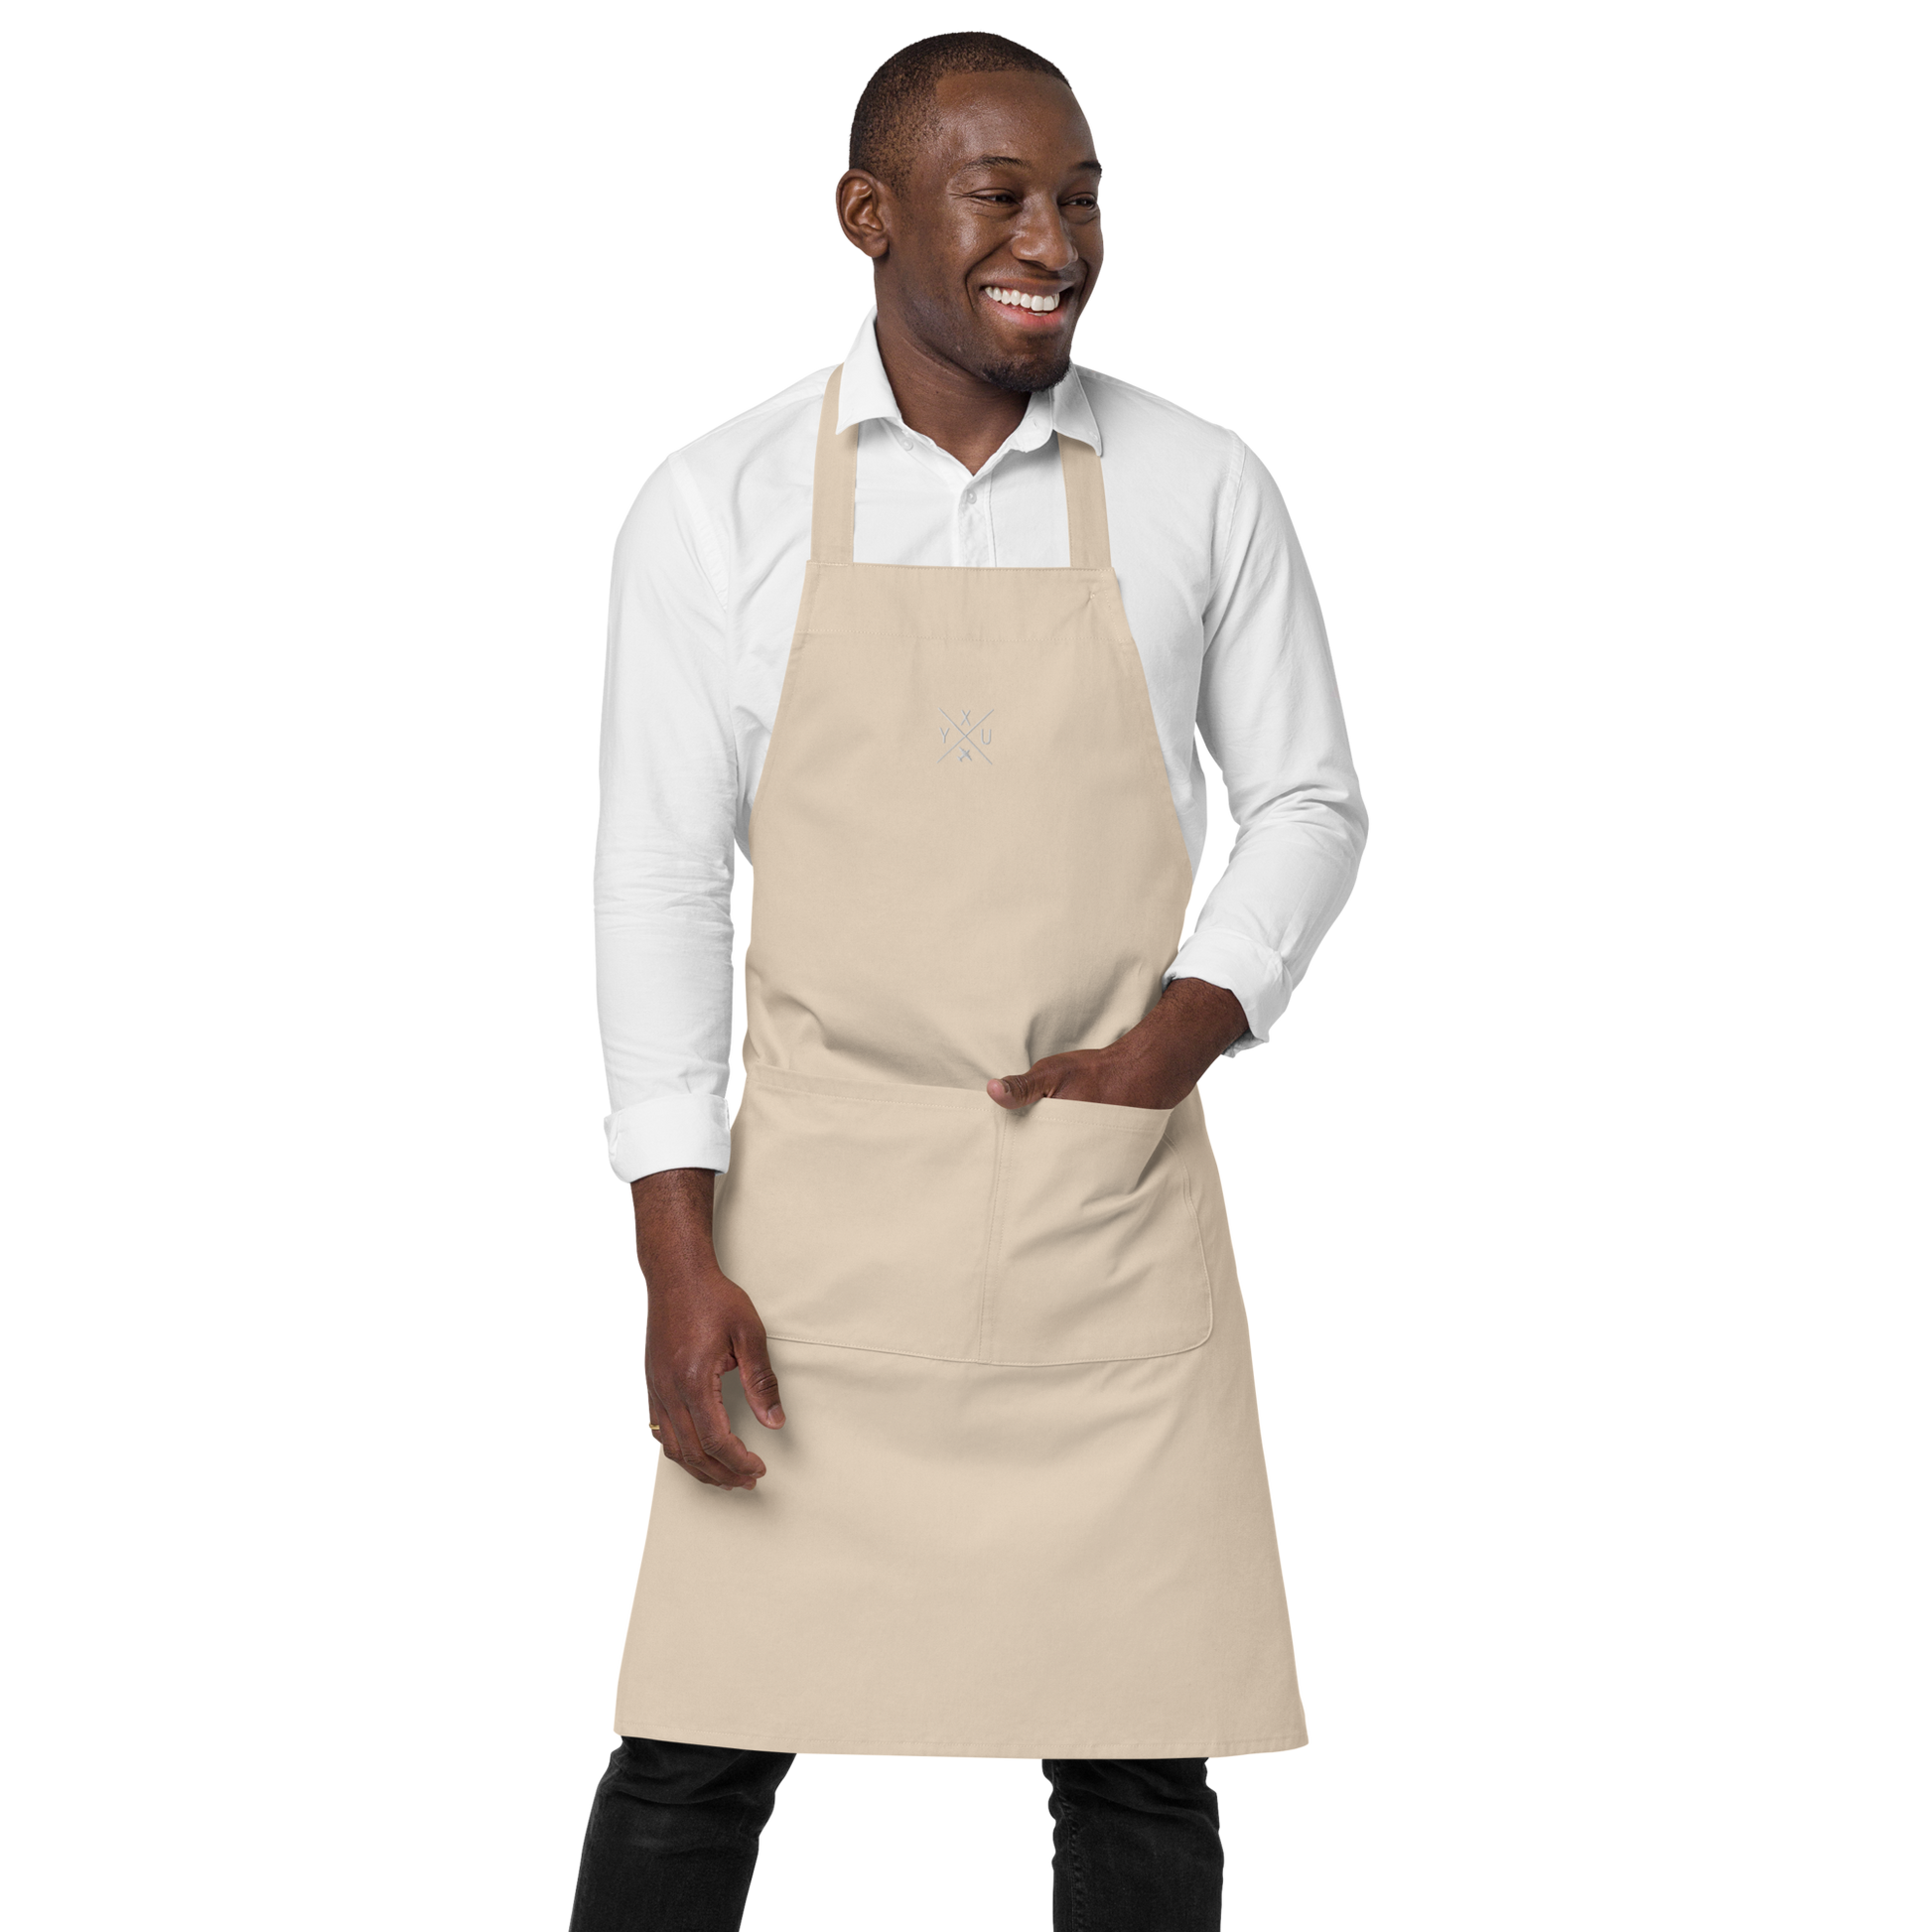 YHM Designs - YXU London Organic Cotton Apron - Crossed-X Design with Airport Code and Vintage Propliner - White Embroidery - Image 14